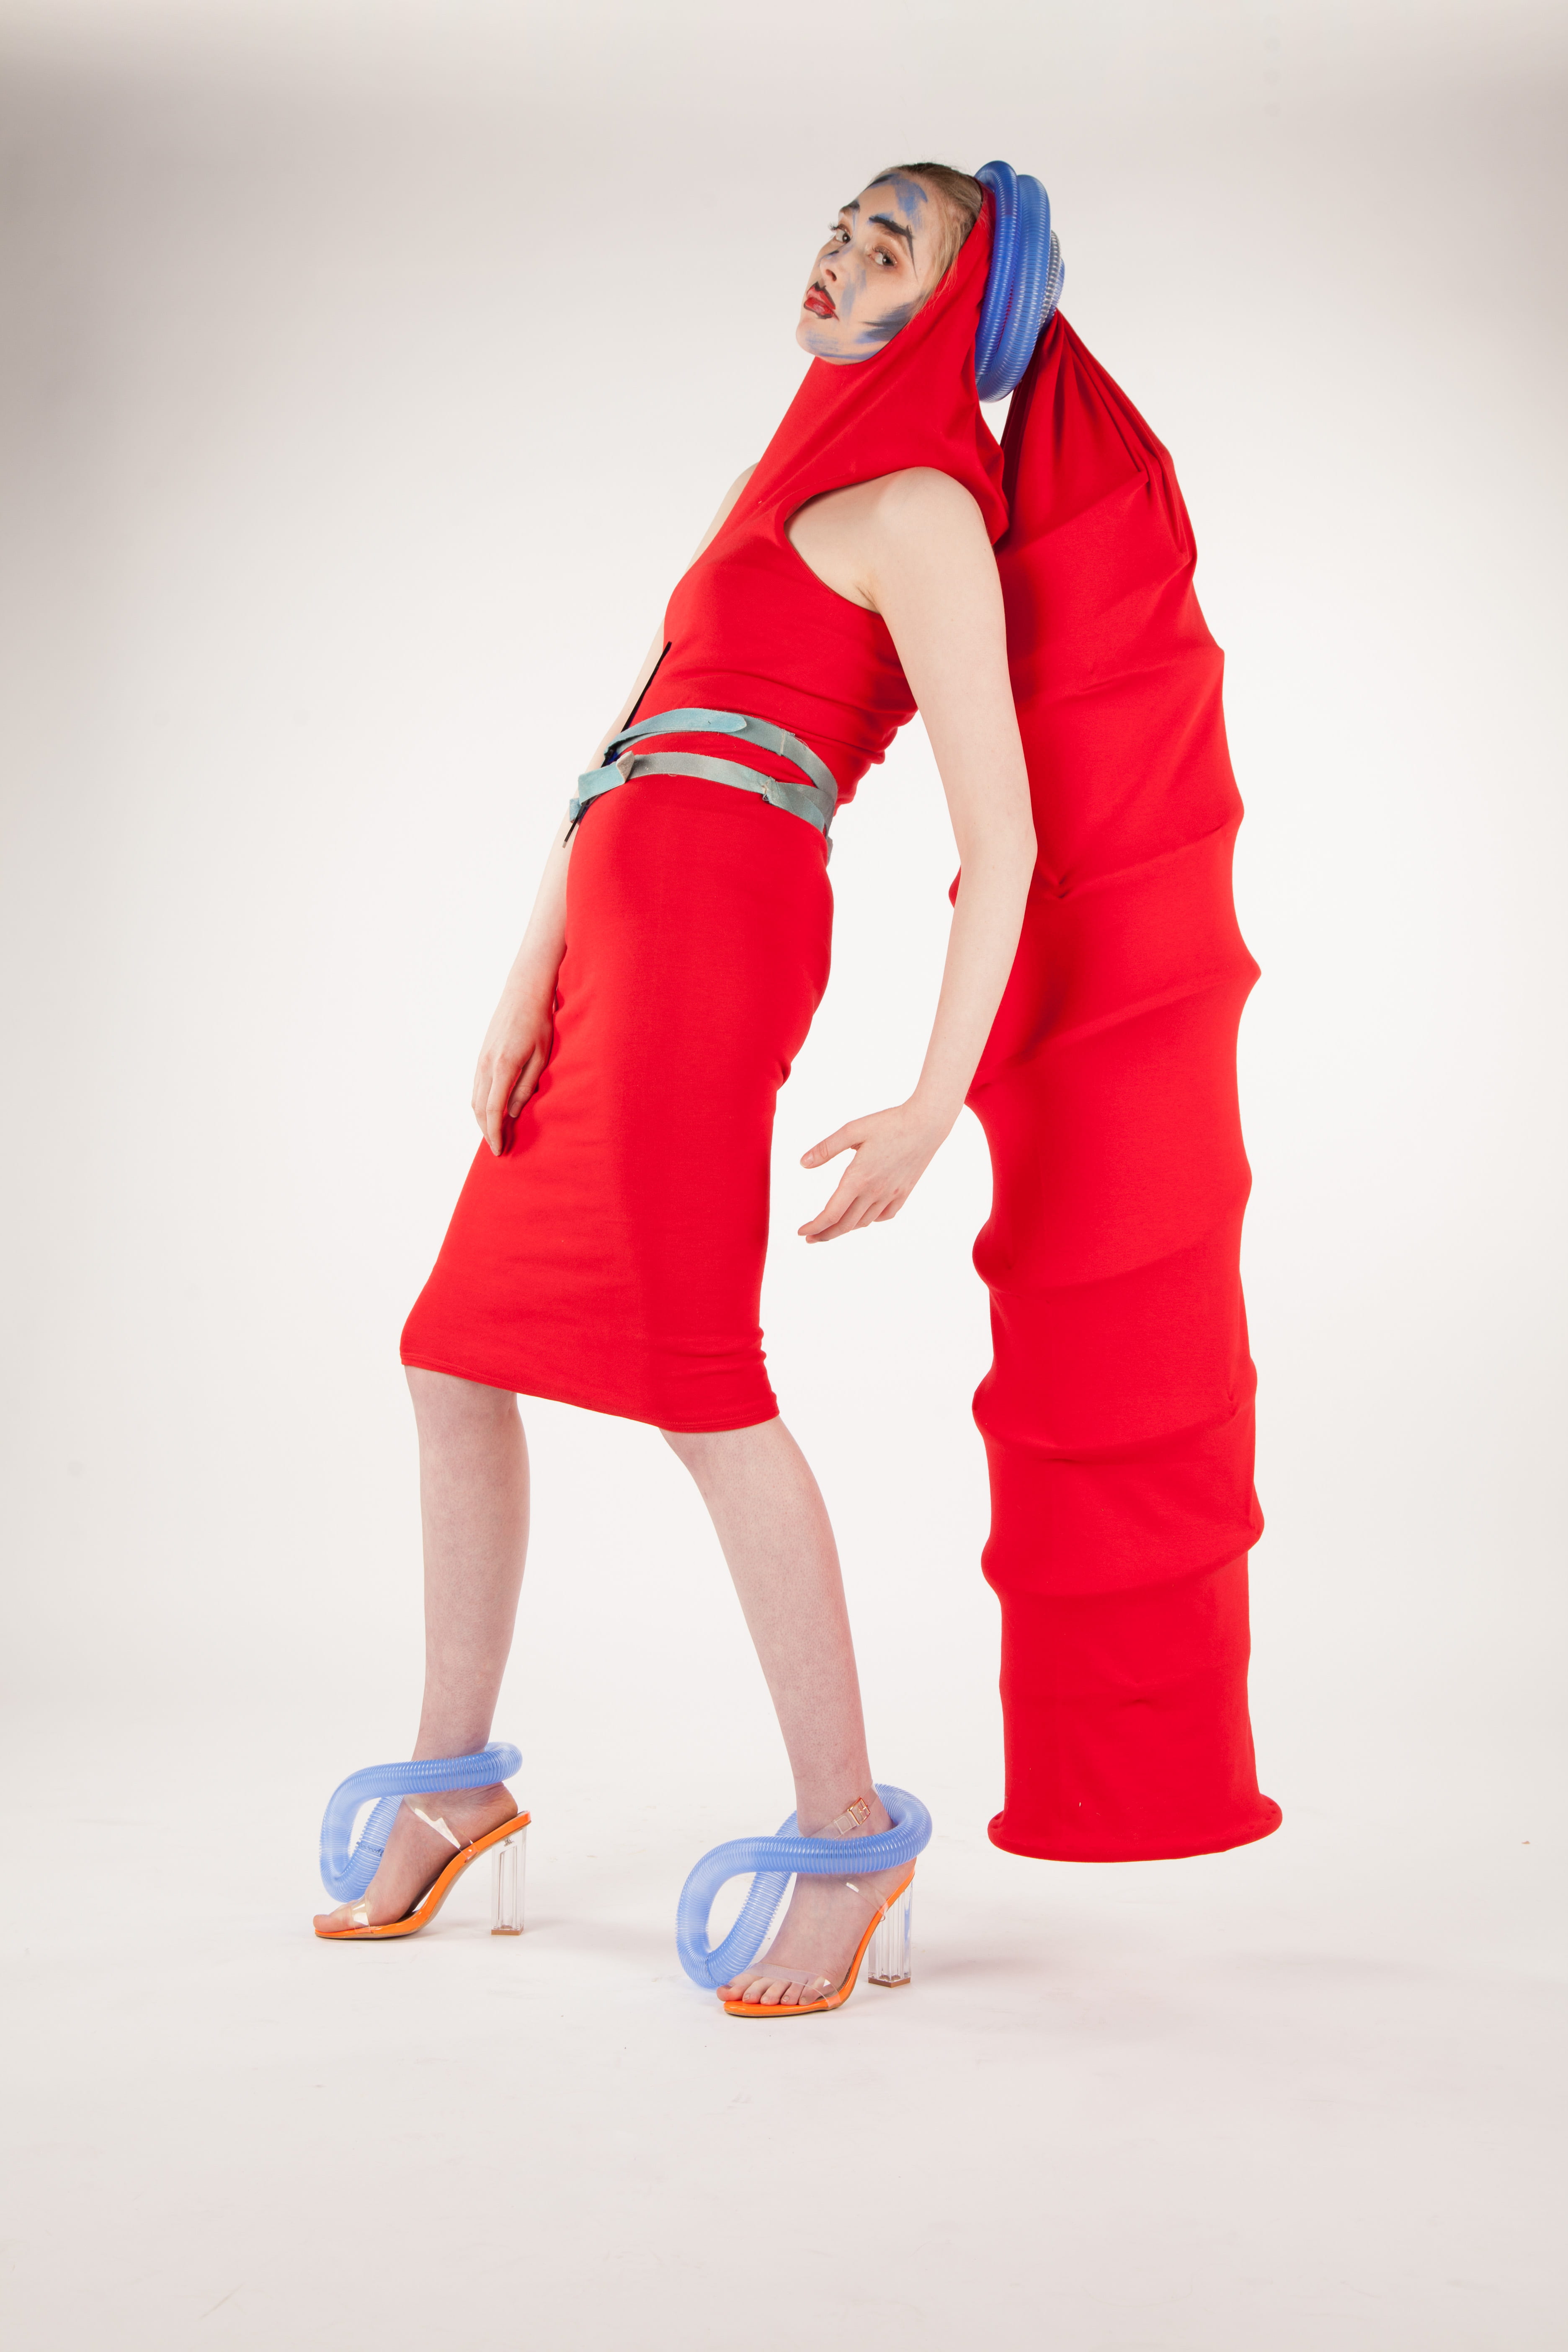 A female model in a red dress, with long, tubular head-wear hanging behind her.